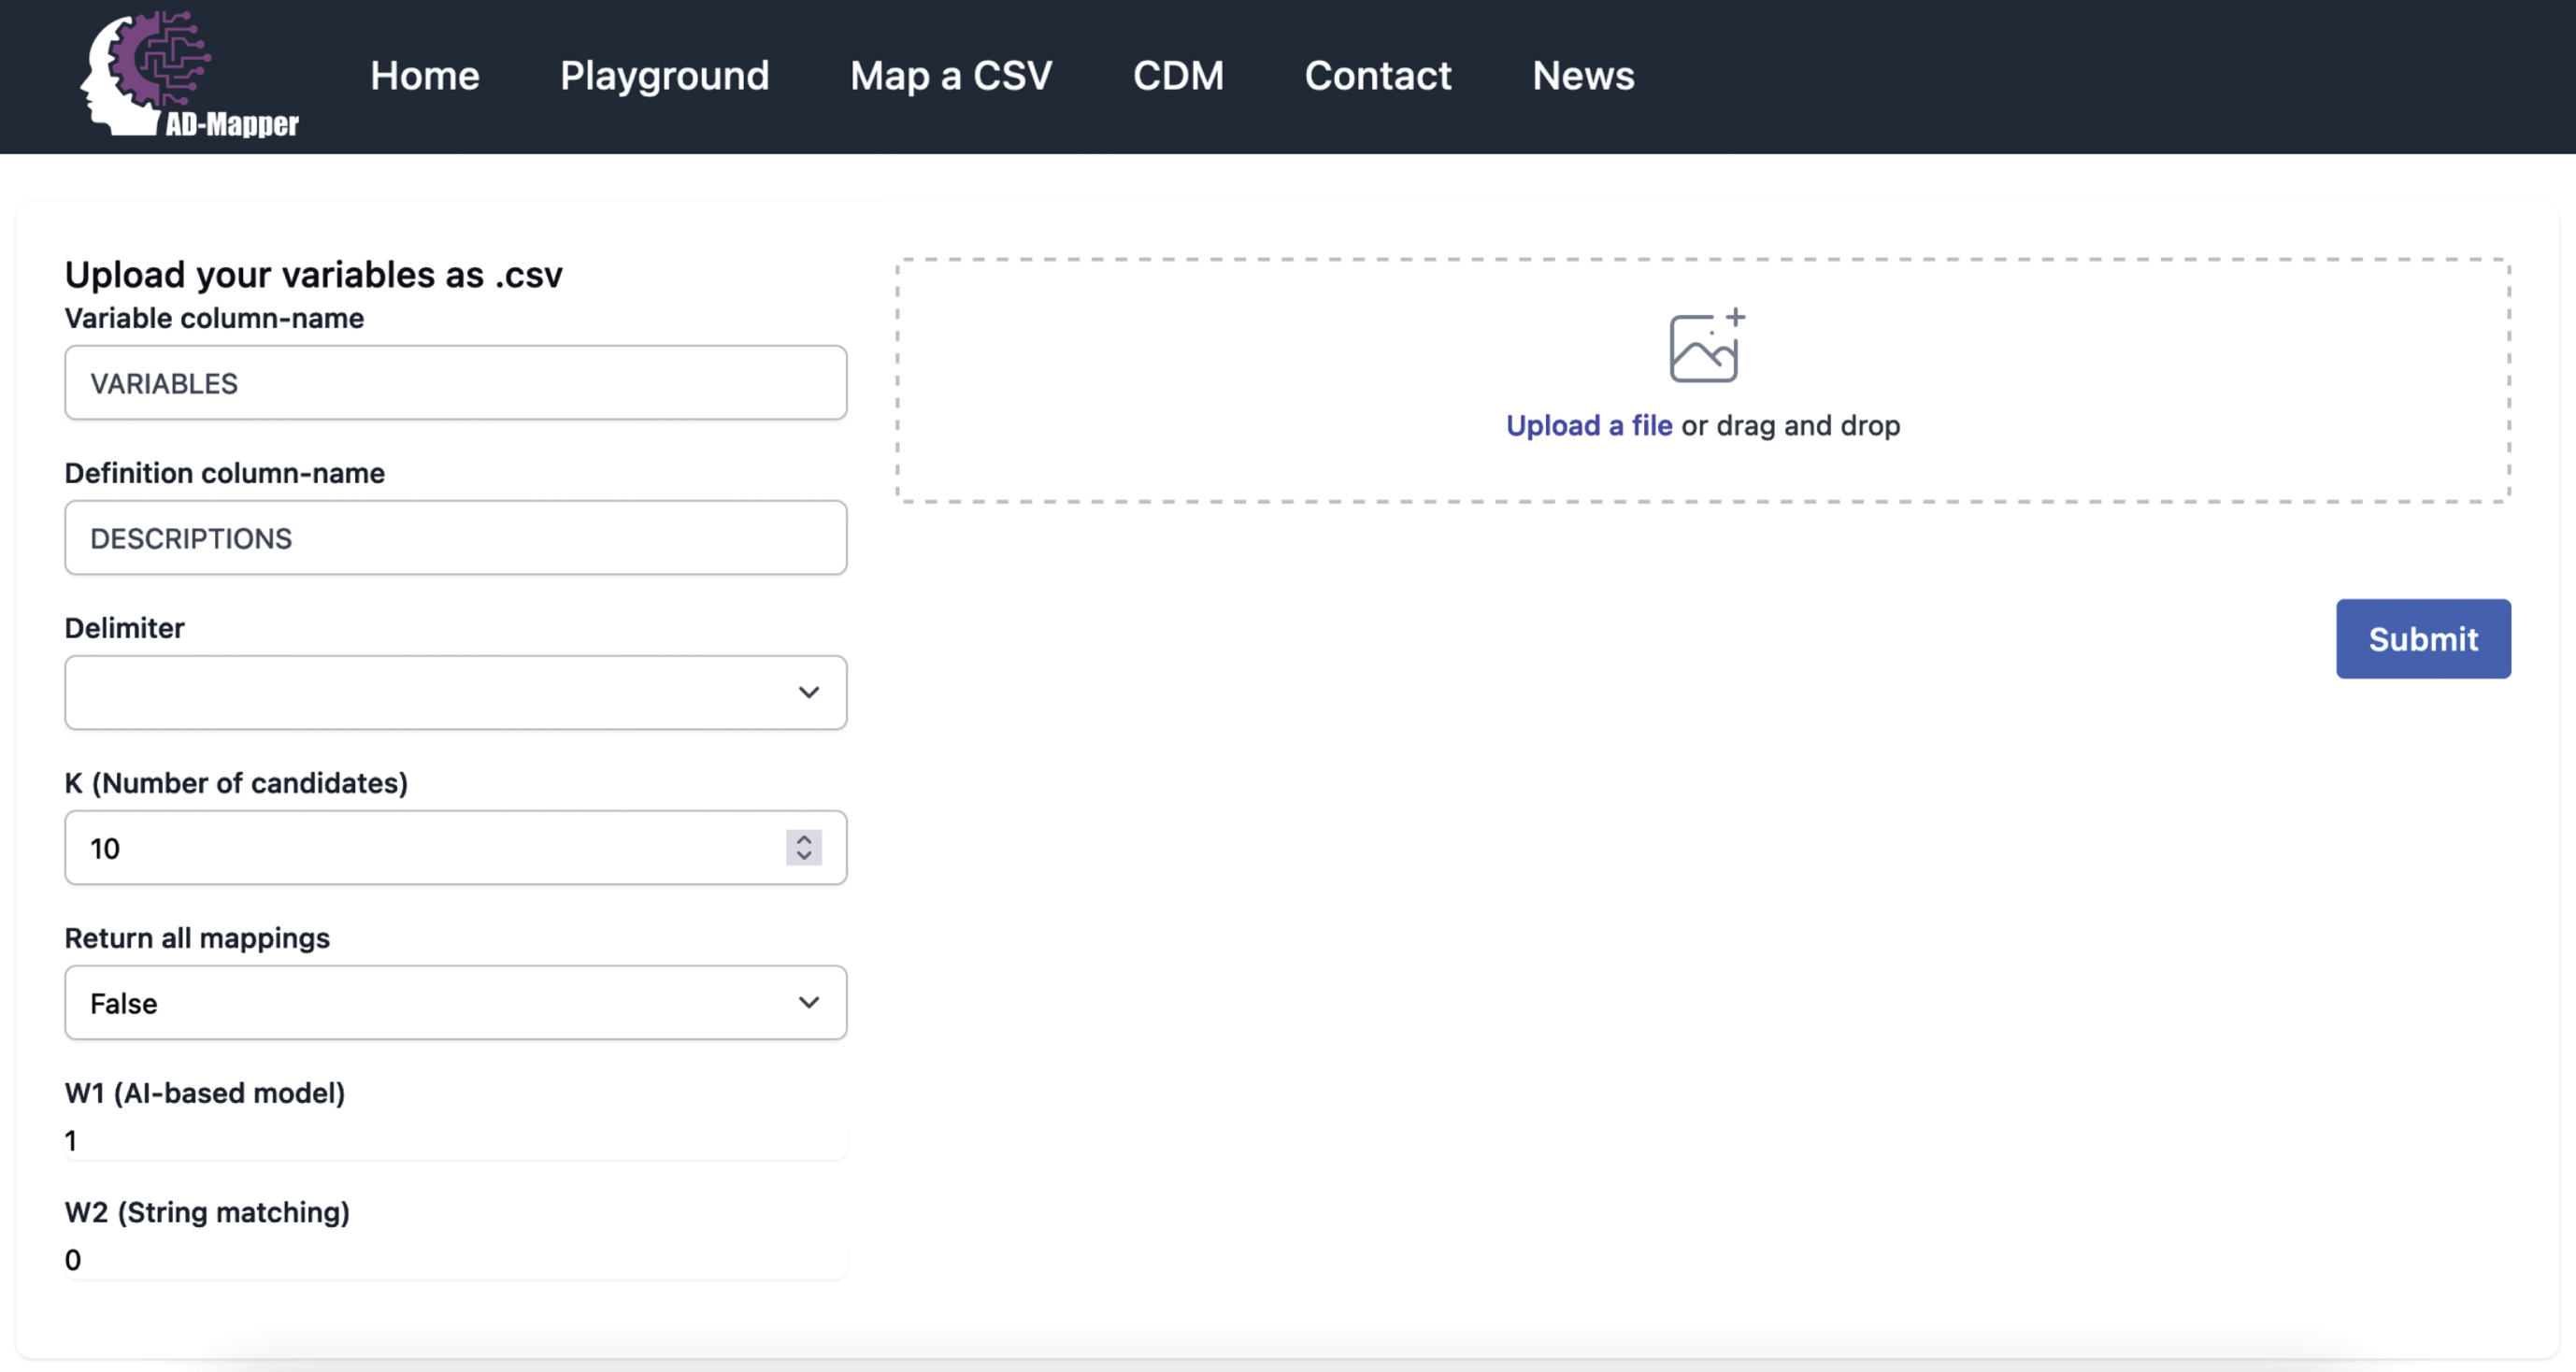 A page preview of the AD-Mapper user interface.